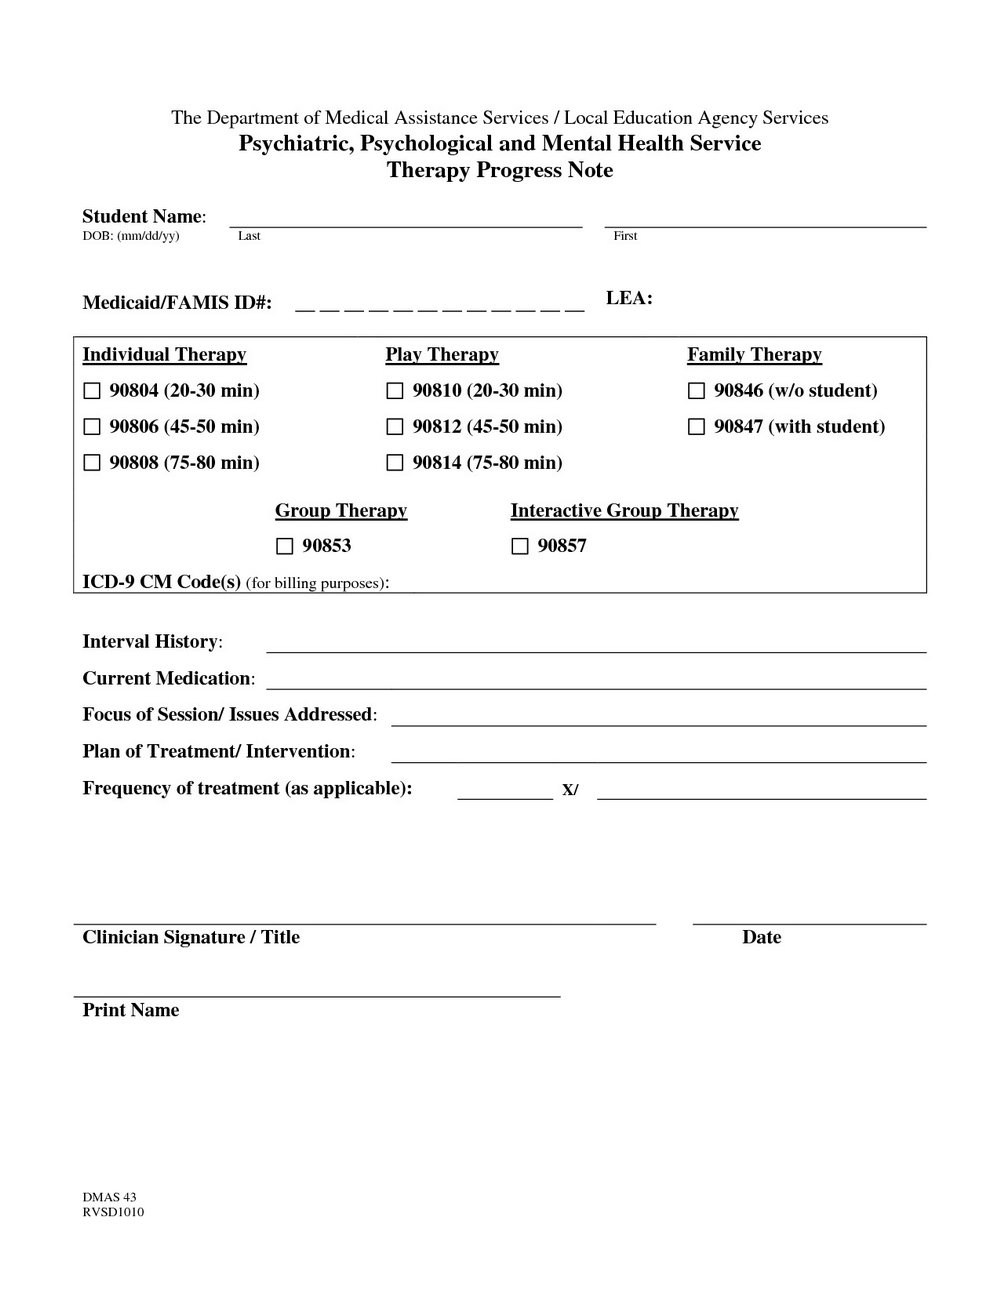 Couples Therapy Progress Note Template | | Mt Home Arts